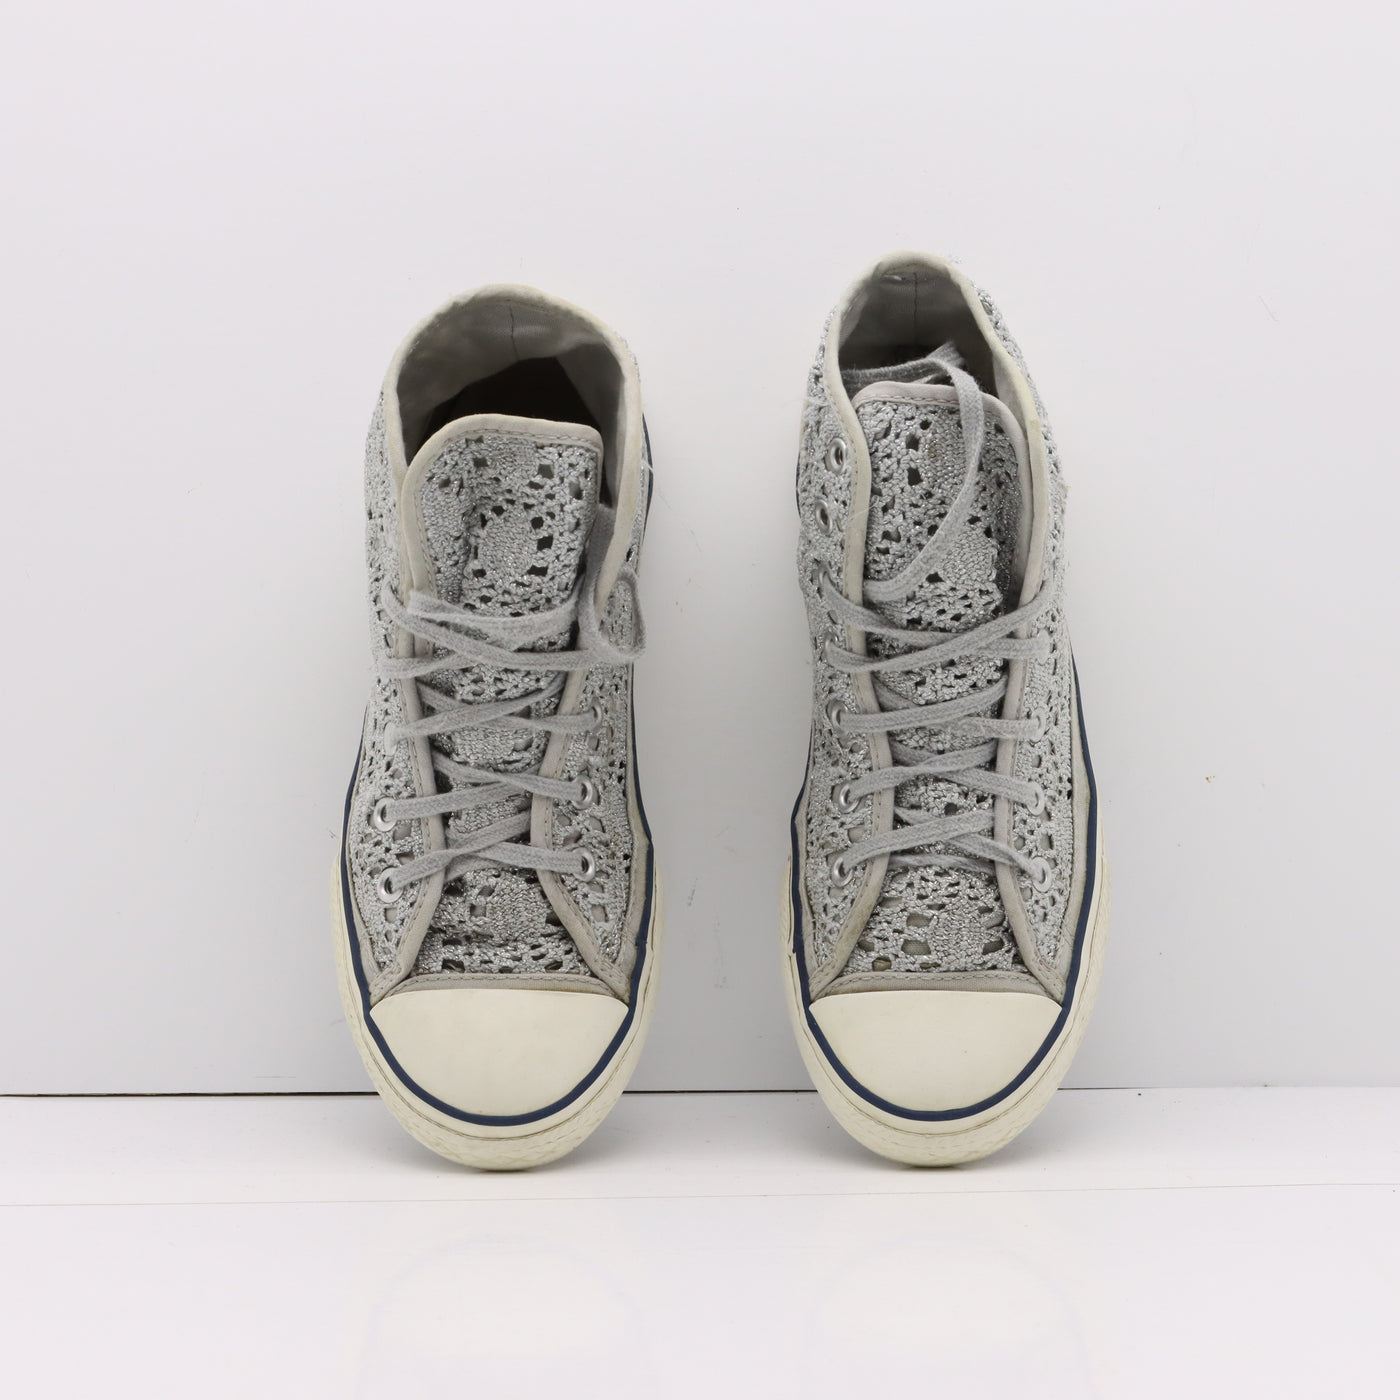 Converse All Star Alte Argentate Merlettate Eur 35 Youth